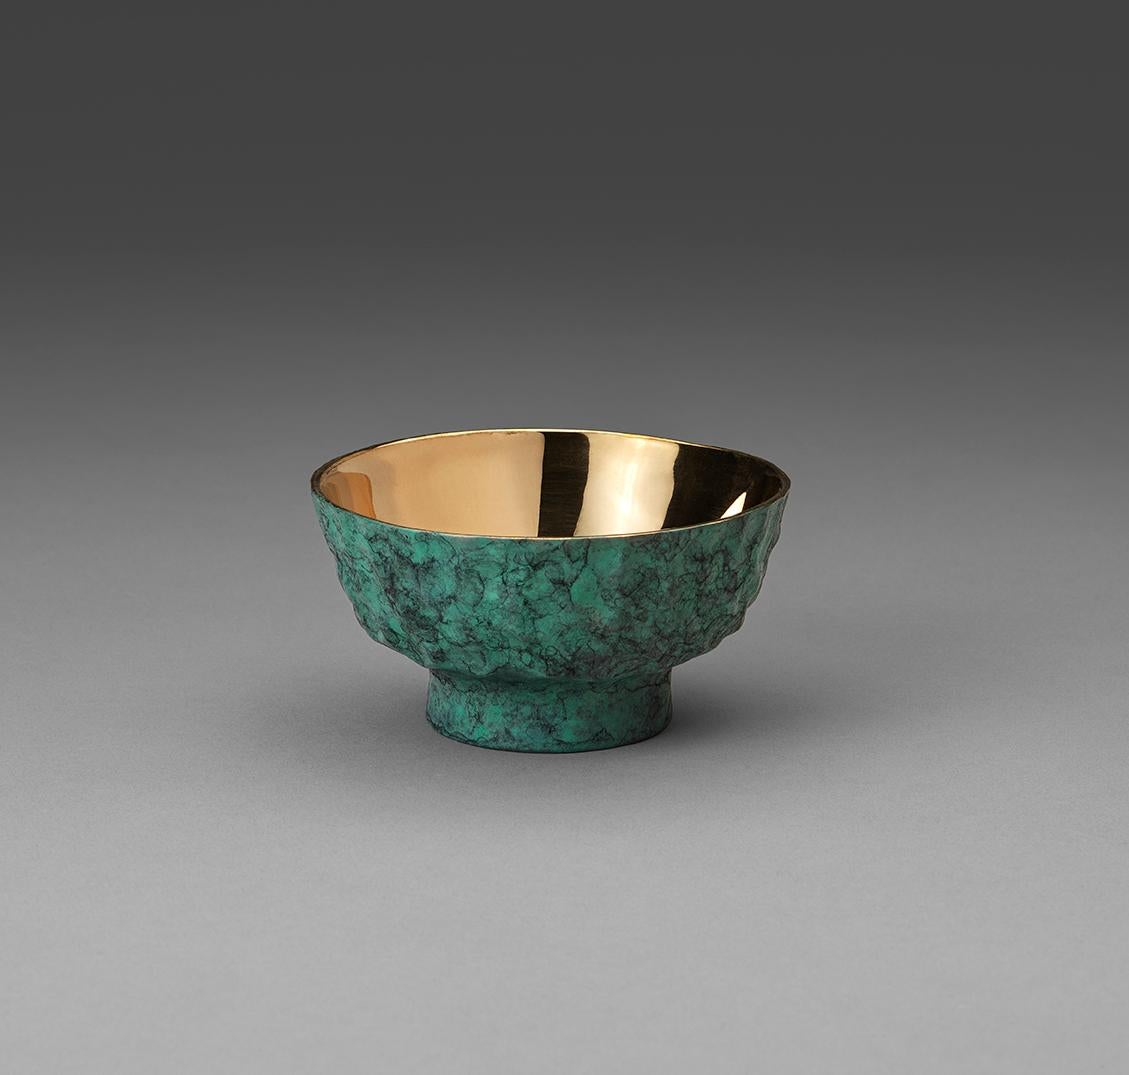 A bronze nut bowl with hand-wrought Verdigris patina. The interior of the bowl has been polished to a mirror finish and contrasts beautifully.